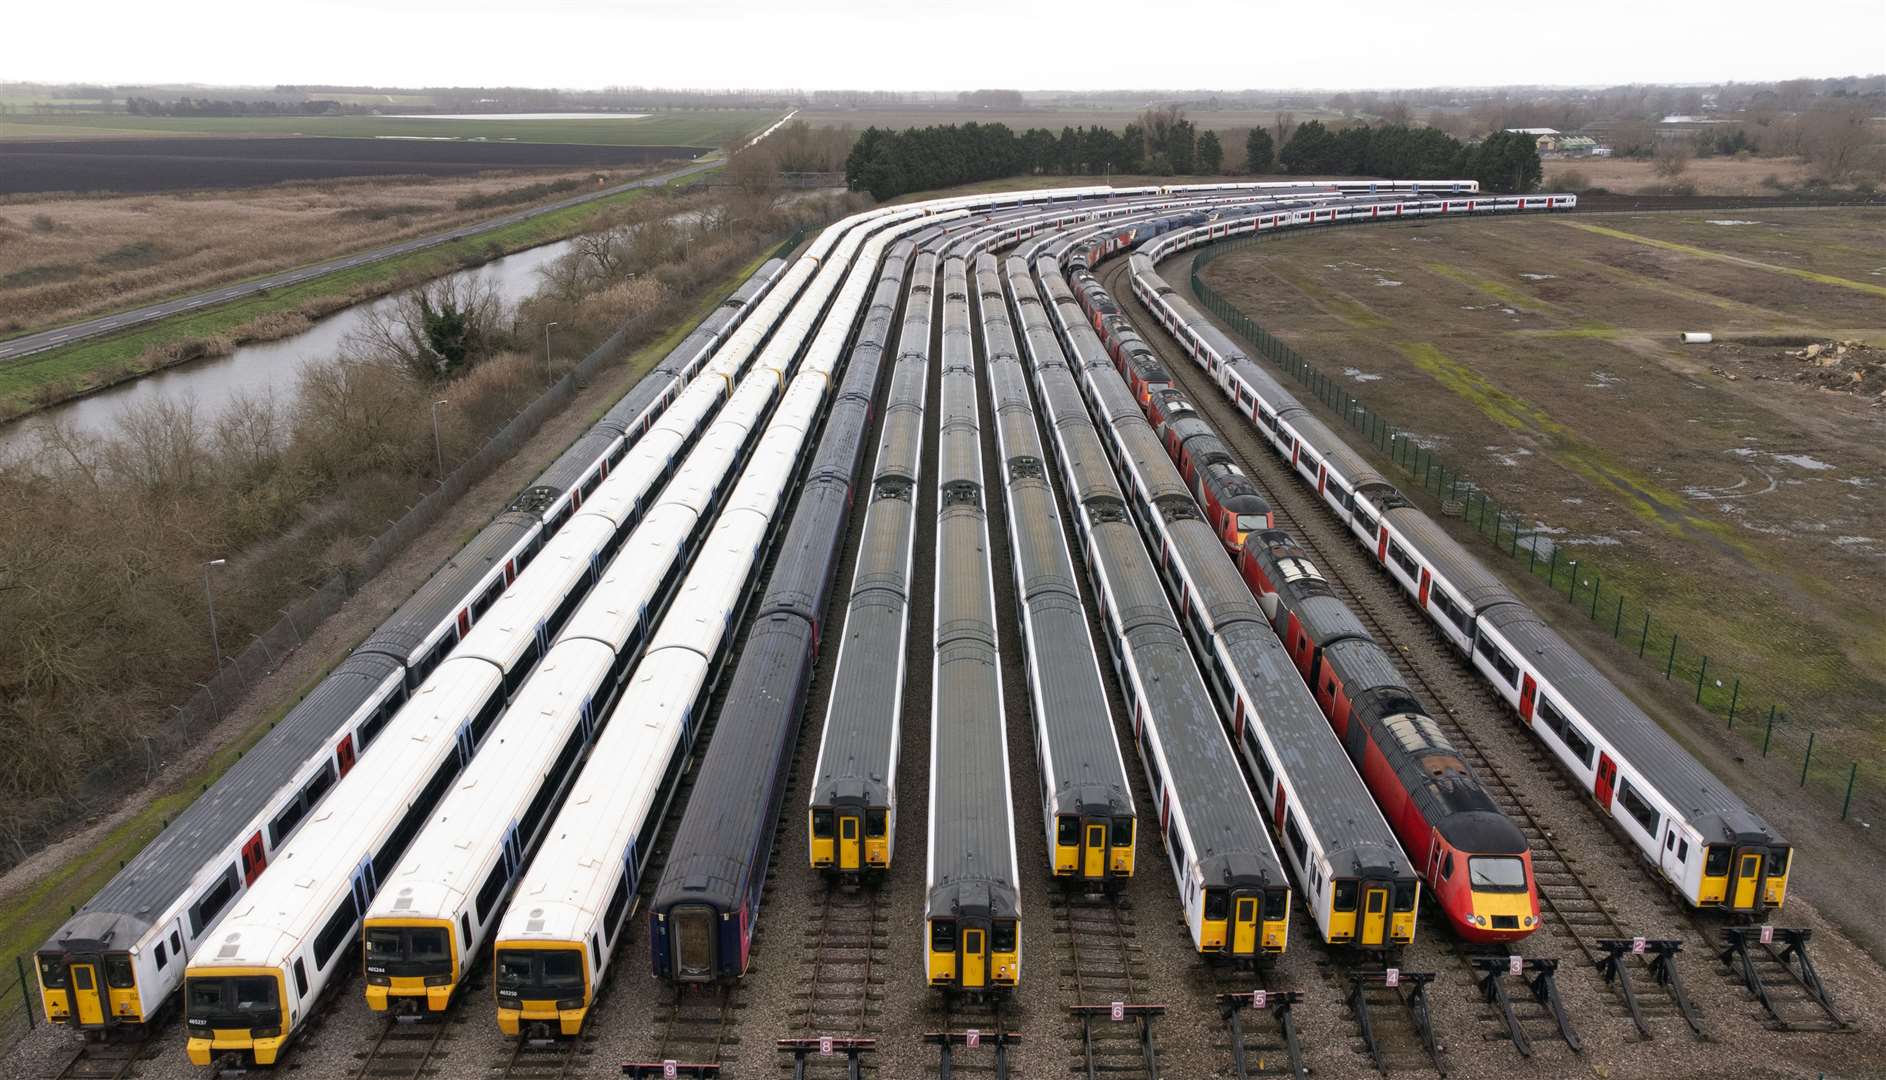 Trains stored at a sidings in Cambridgeshire as train drivers take industrial action (Joe Giddens/PA)